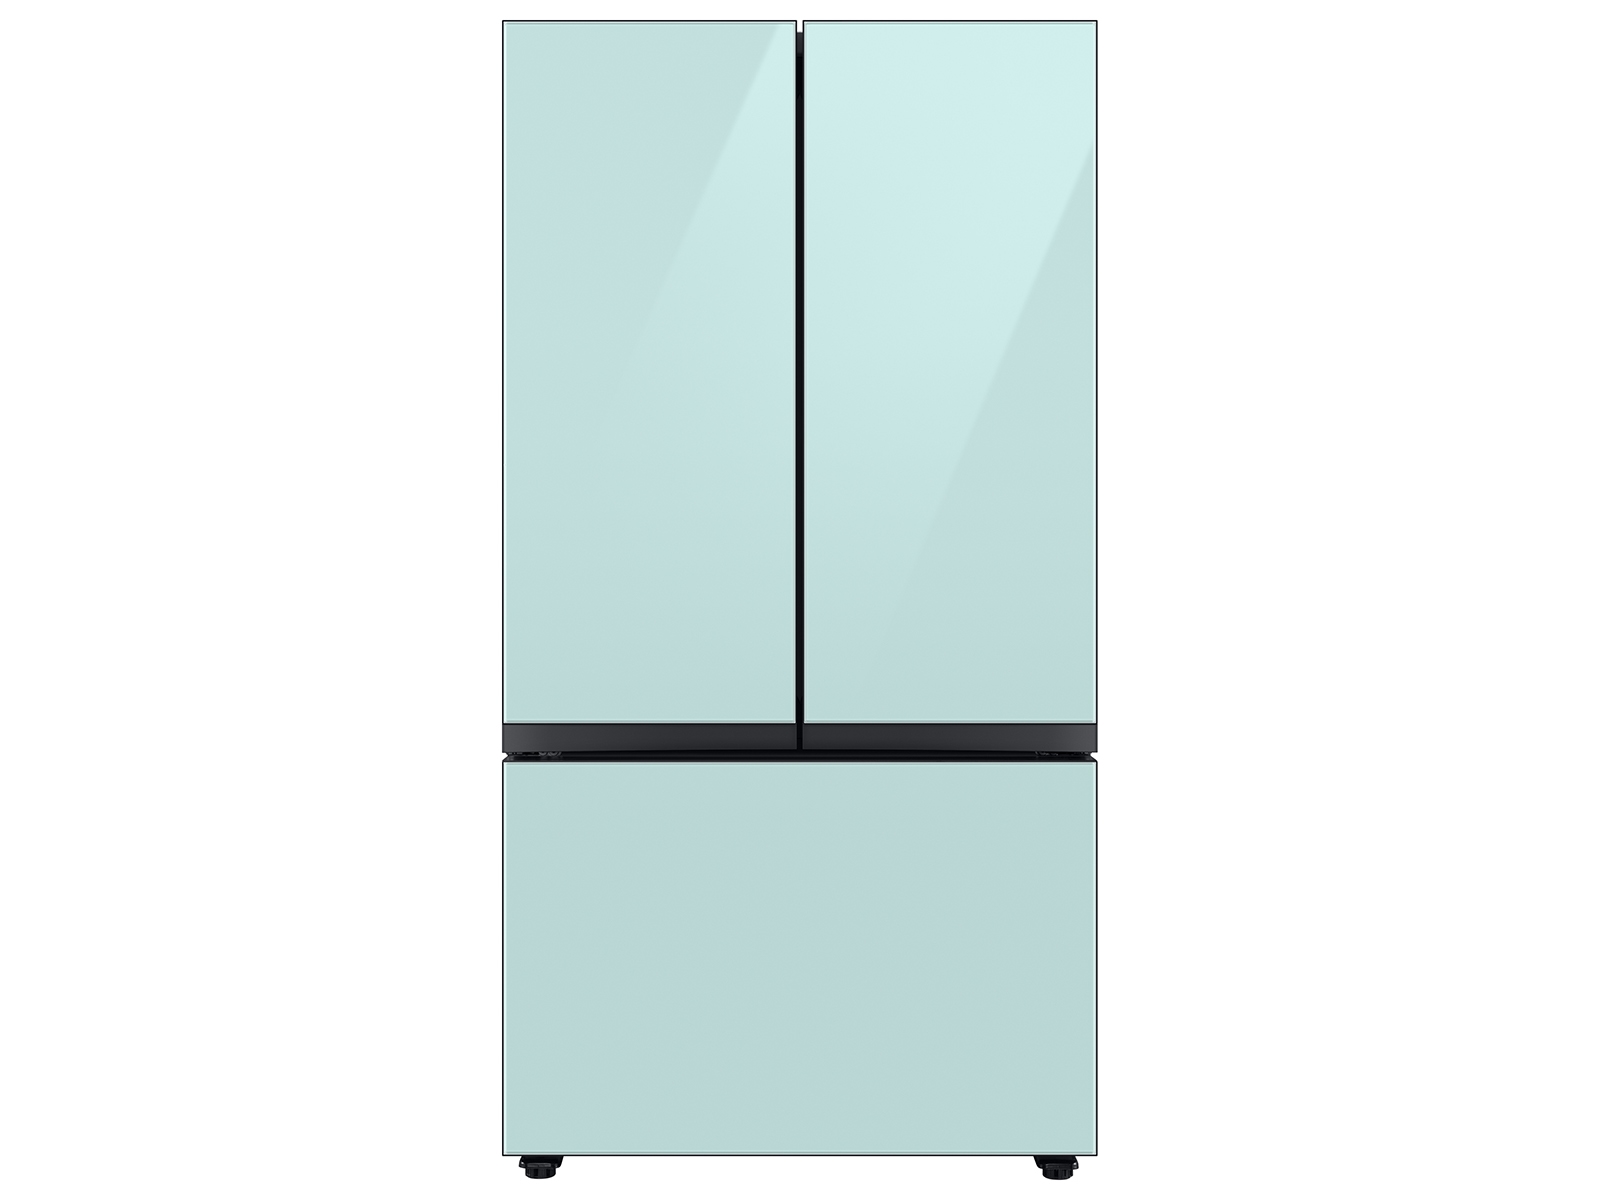 Samsung Bespoke 3-Door French Door Refrigerator (24 cu. ft.) with AutoFill Water Pitcher in Morning in Blue Glass(BNDL-1650465915460)